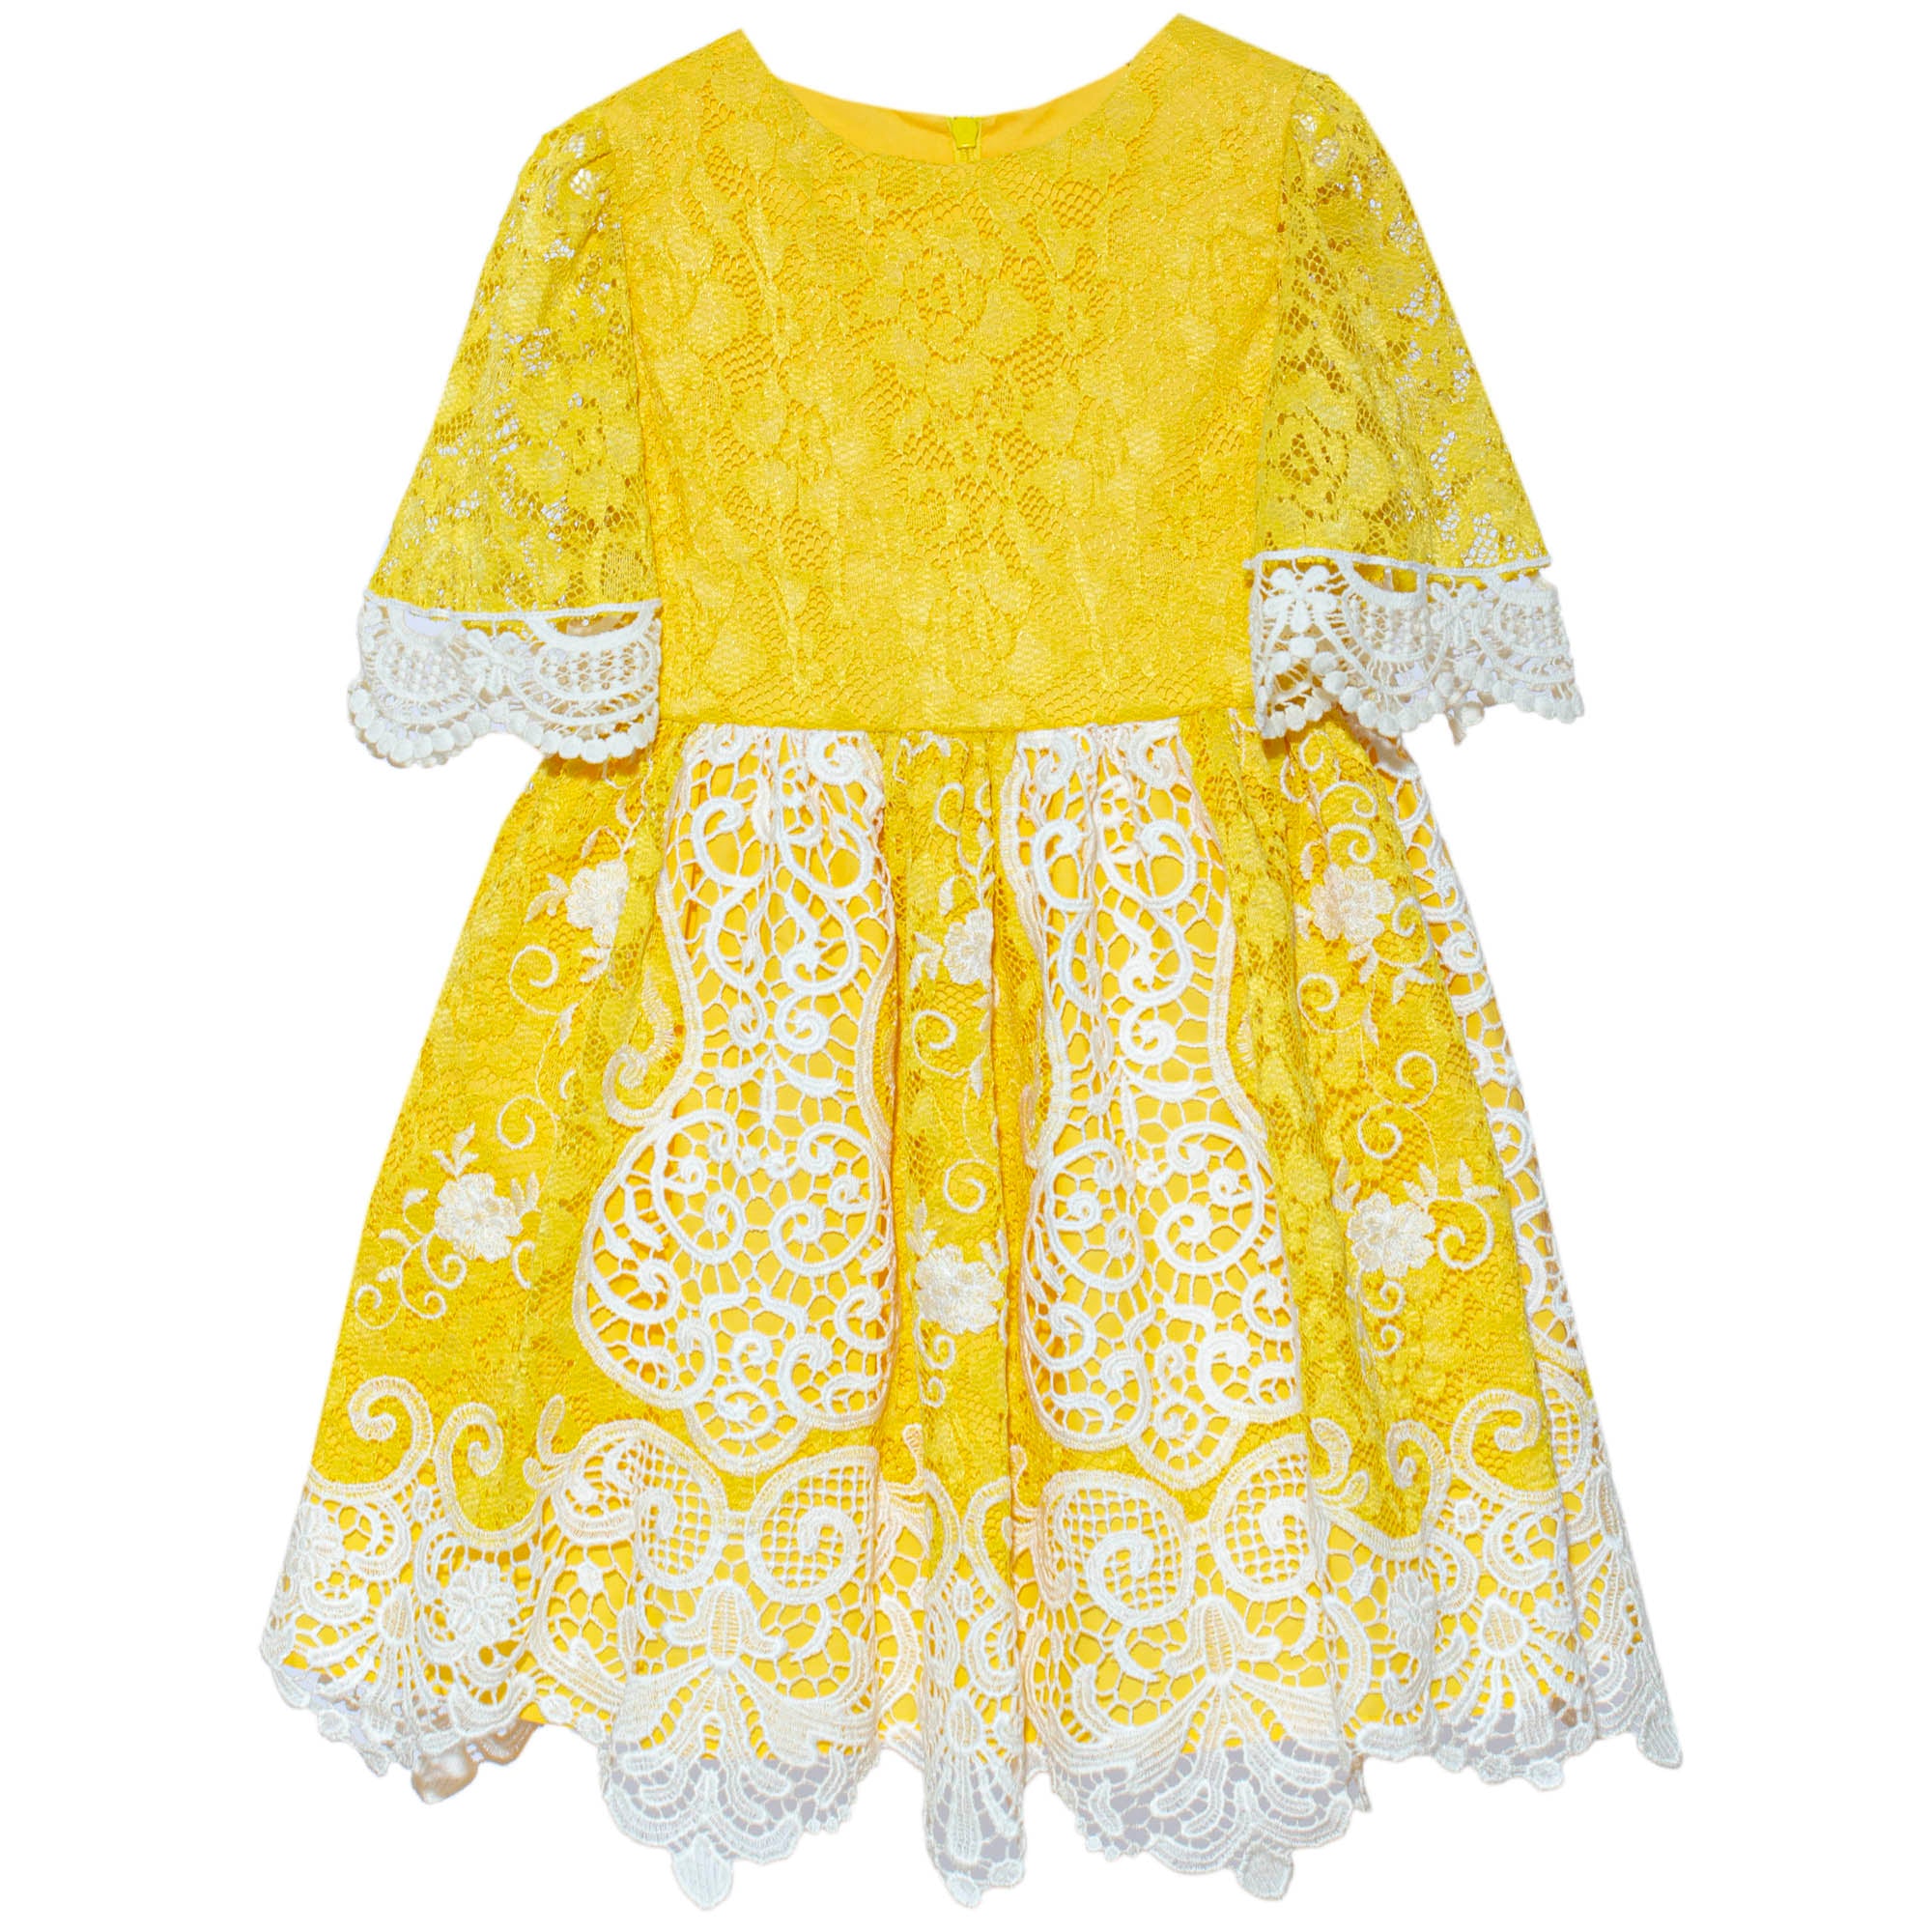 Patachou yellow and lace girls dress spring 20 summer